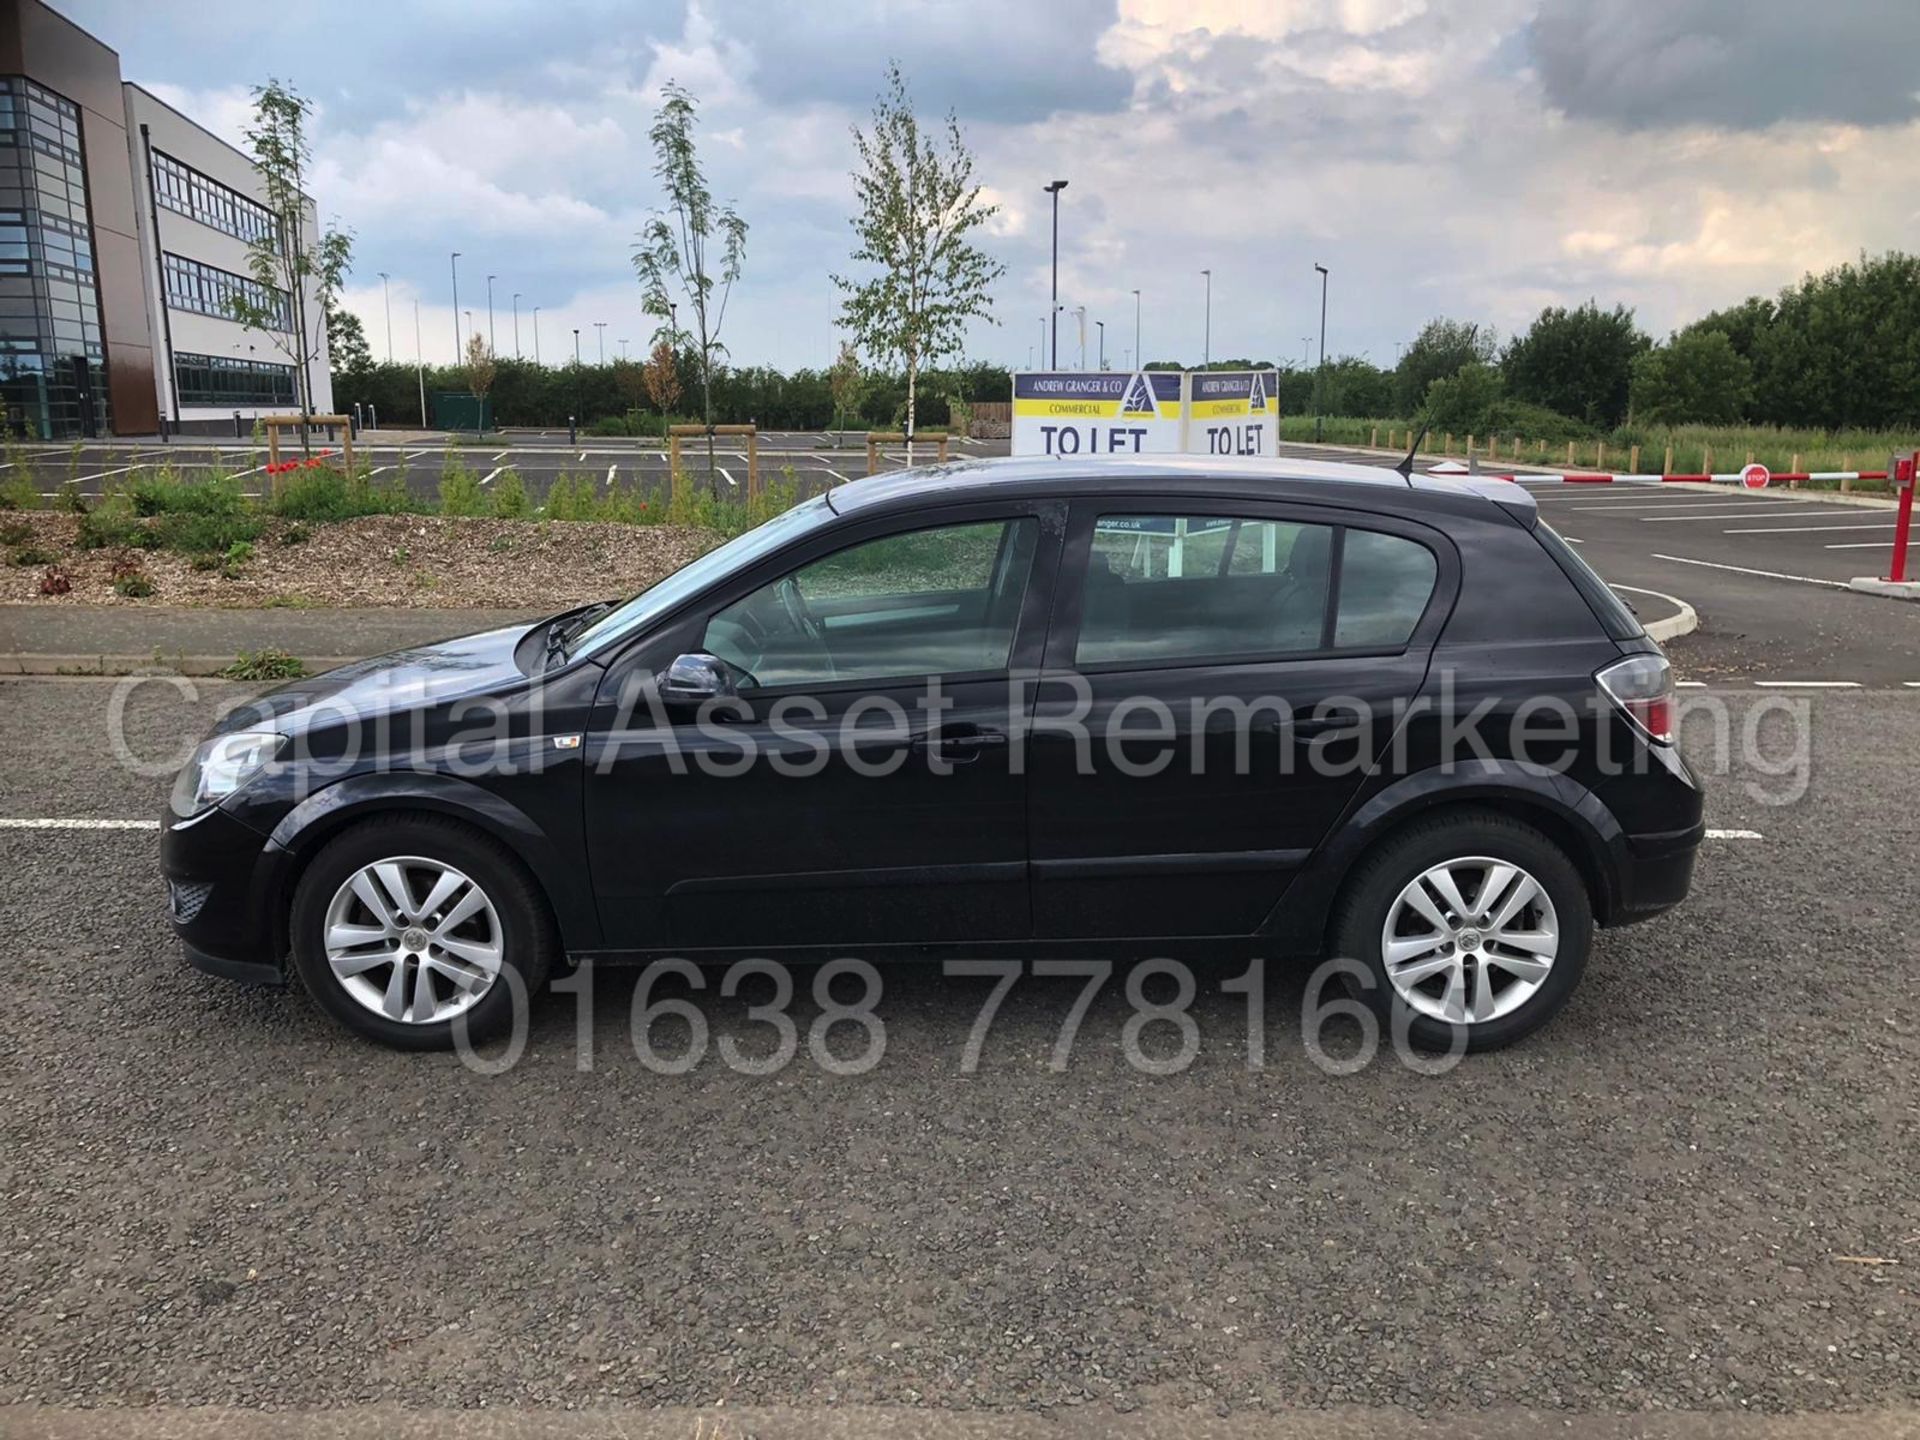 On Sale VAUXHALL ASTRA *SXI TWINPORT* HATCHBACK (2007) '1.4 PETROL' *AIR CON* (NO VAT) - Image 5 of 16